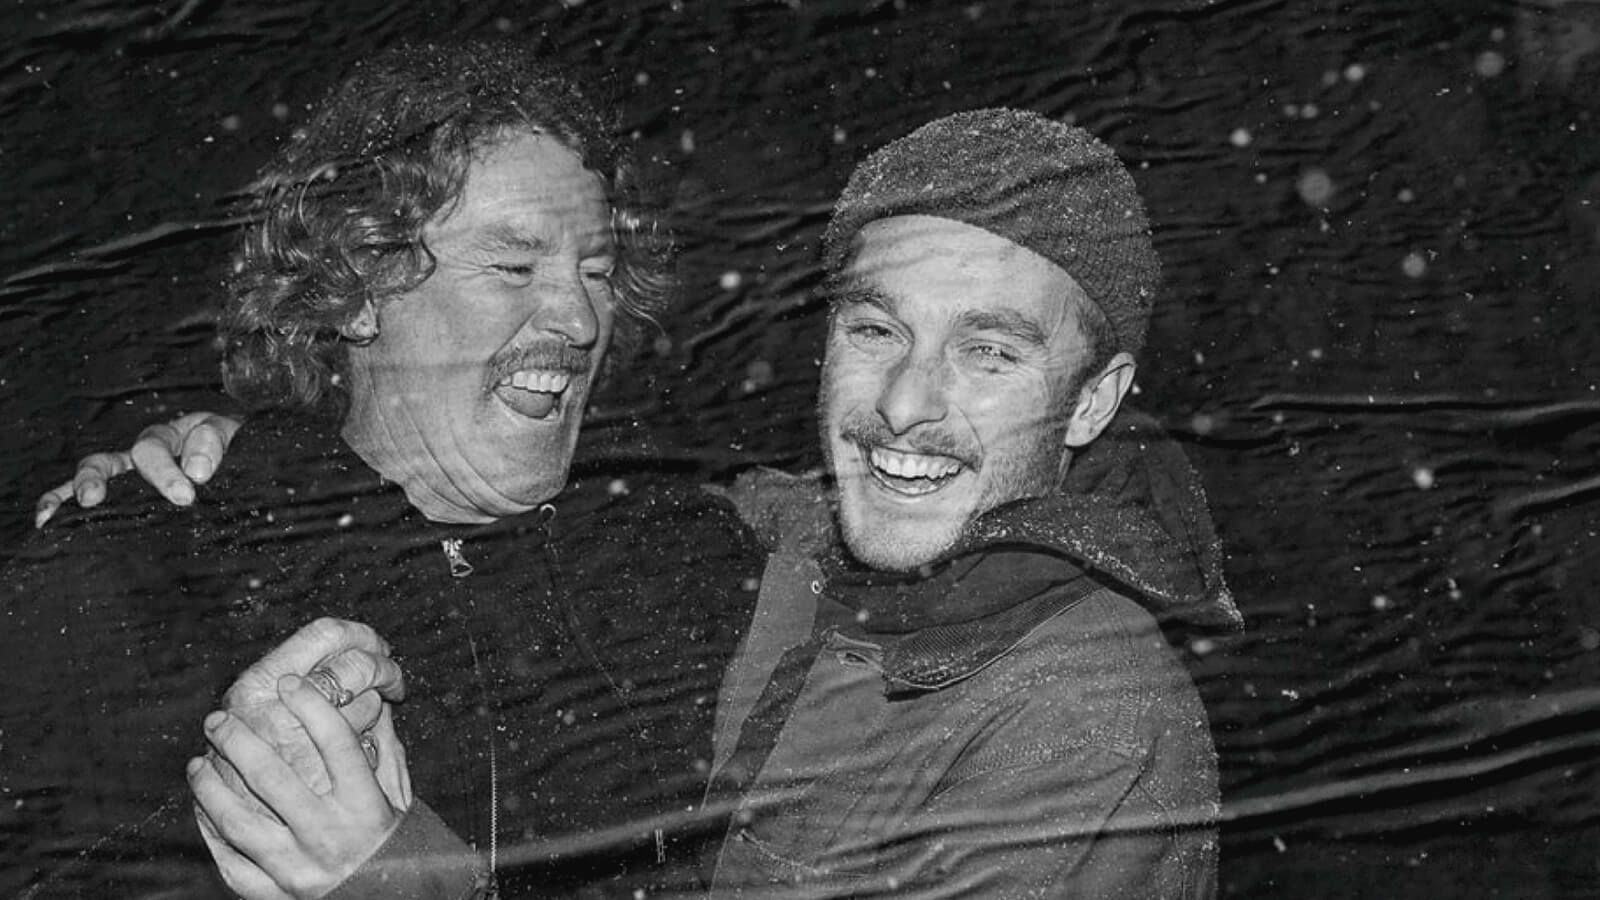 Two men, smiling wildly to camera, semi-embracing under a light snowfall.